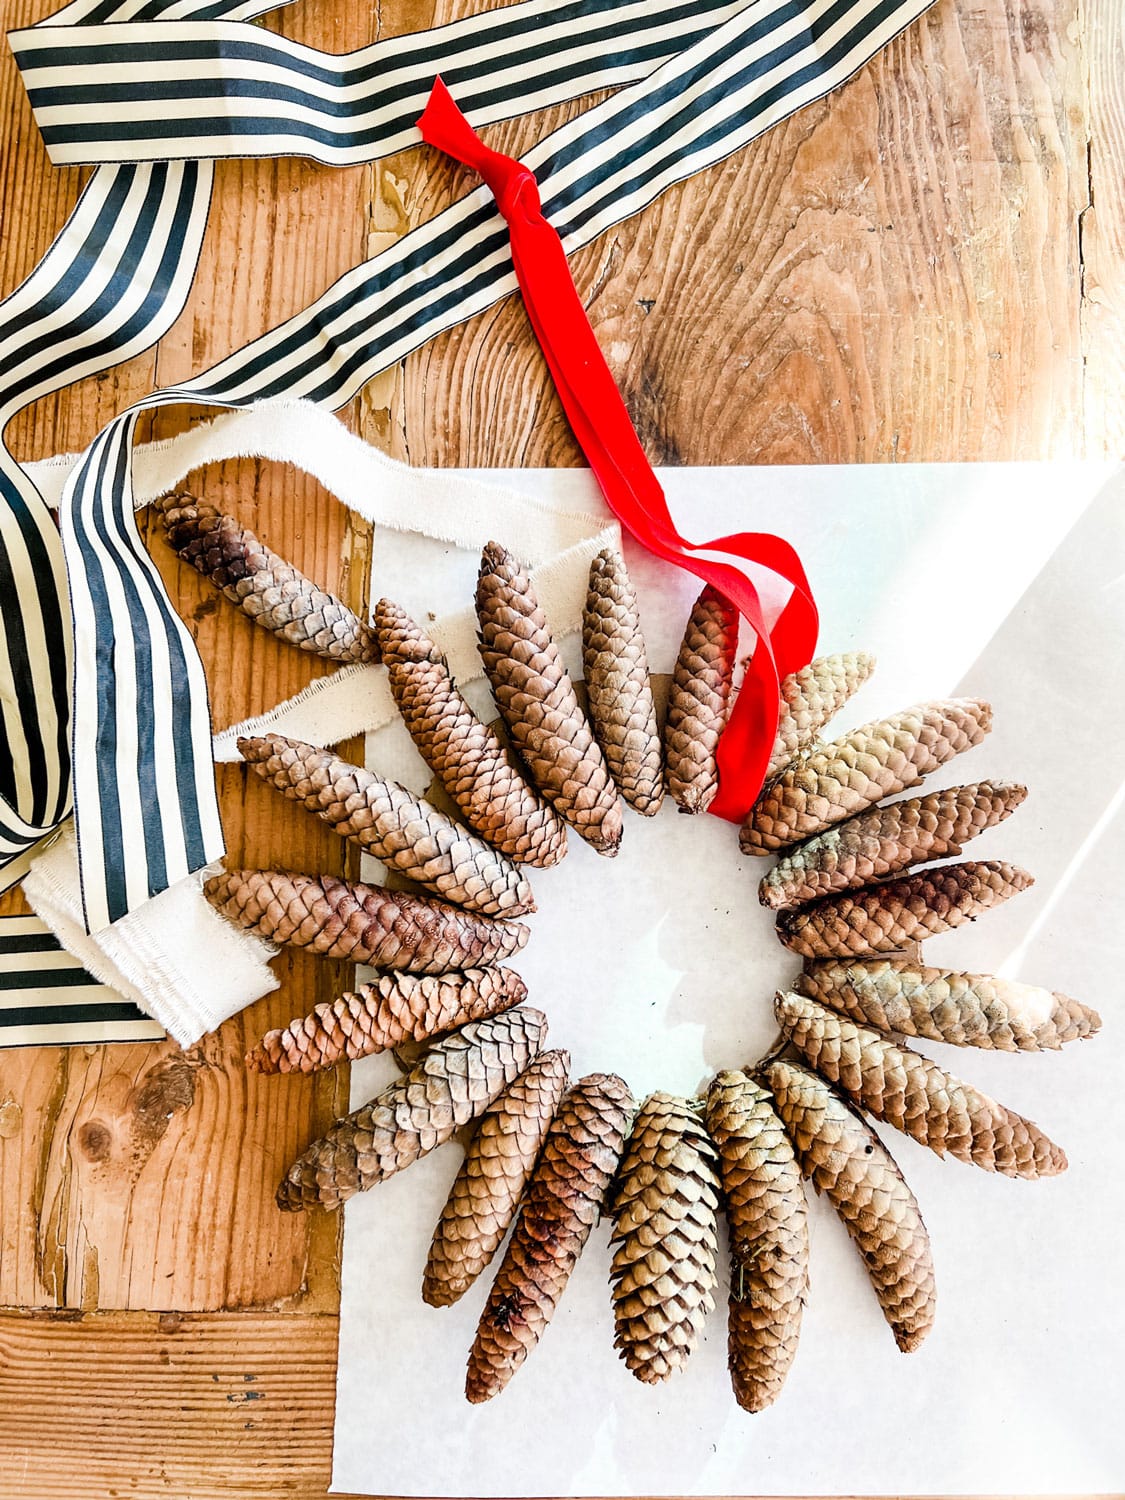 Make a Simple Pinecone Wreath for Under a dollar. | Most Lovely Things